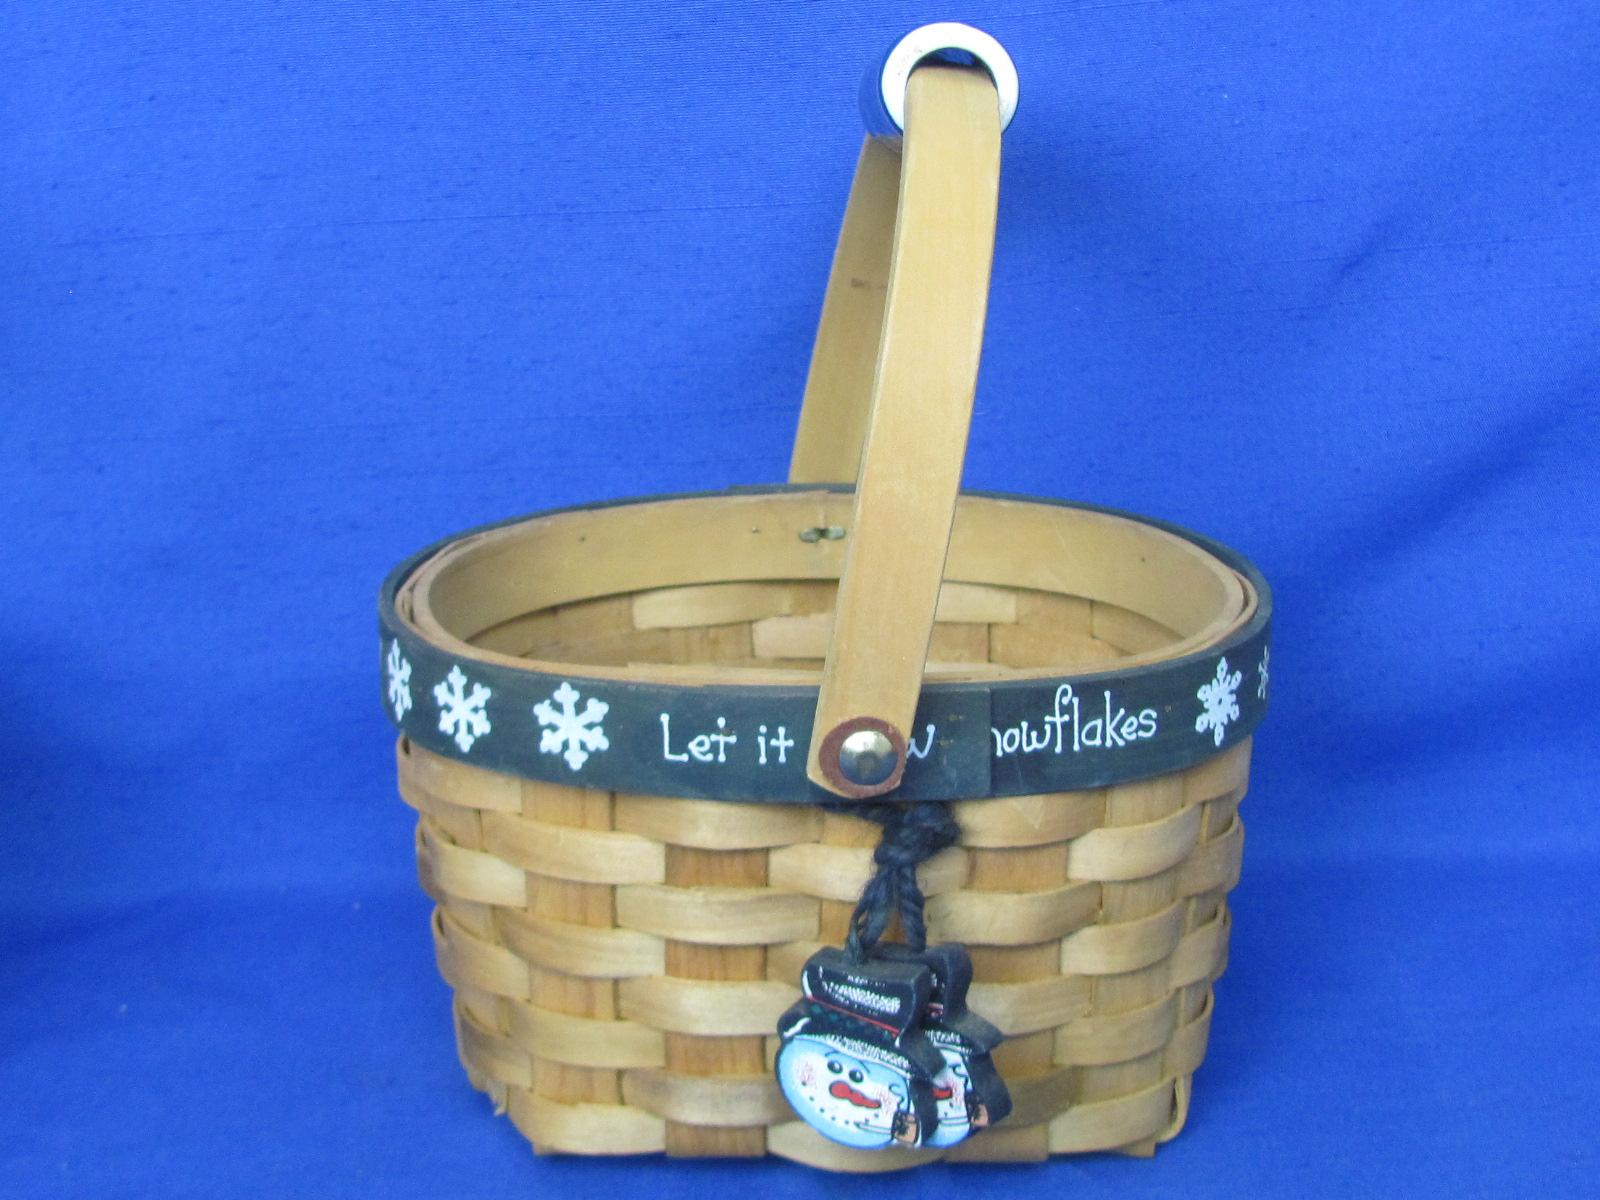 3 Woven Baskets: 2 are “Let it Snow” with Blue Trim – Largest is 8 1/2” long